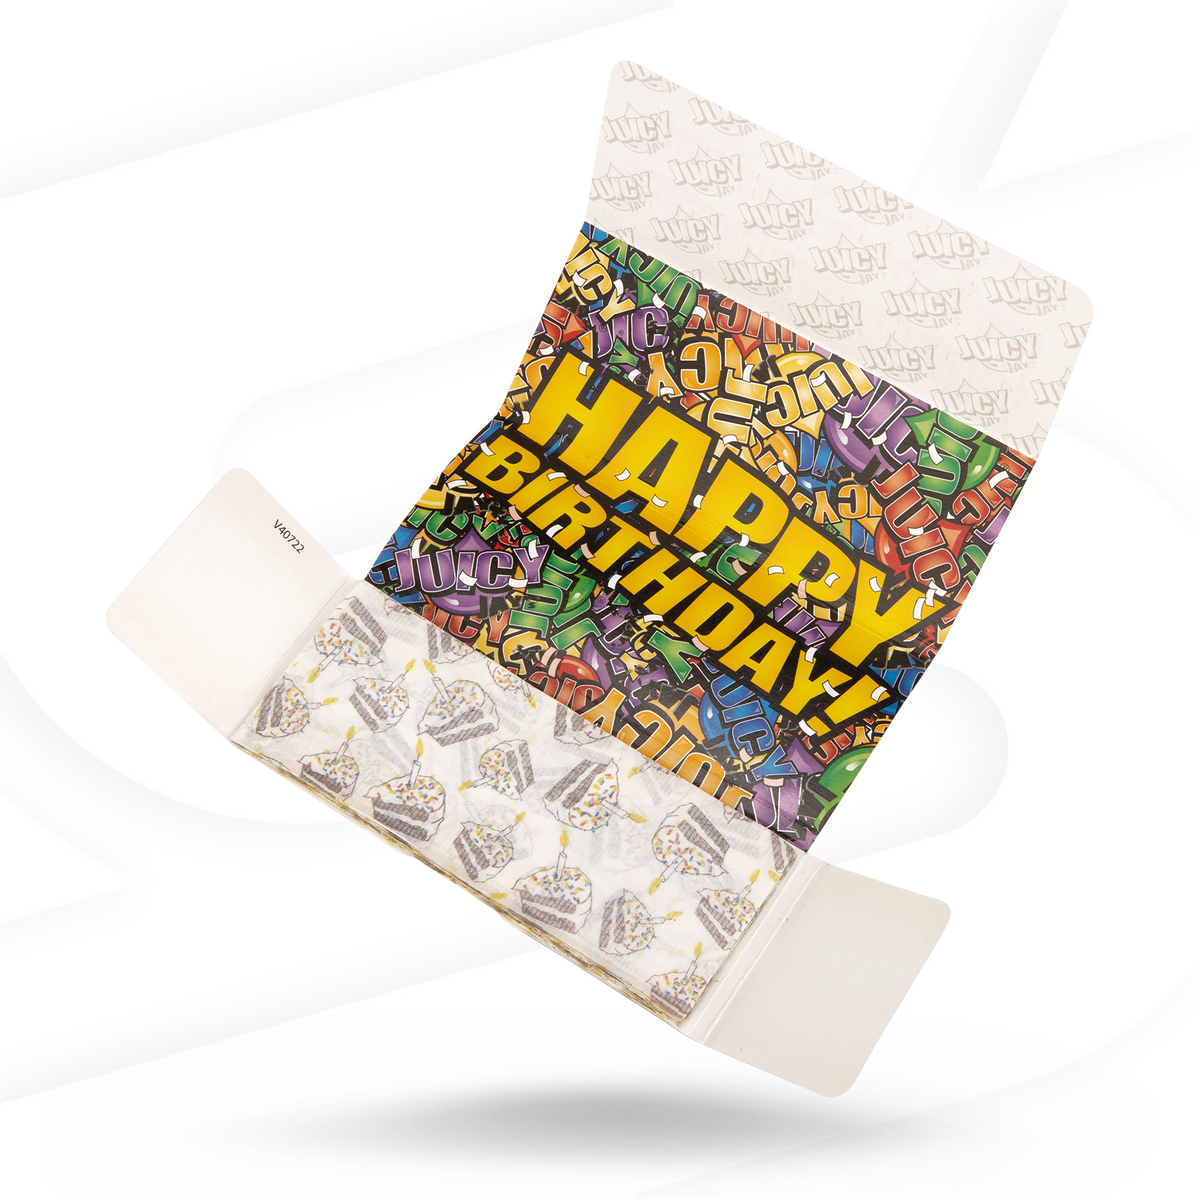 Juicy Jays King Size Supreme Birthday Cake Rolling Papers esd-official